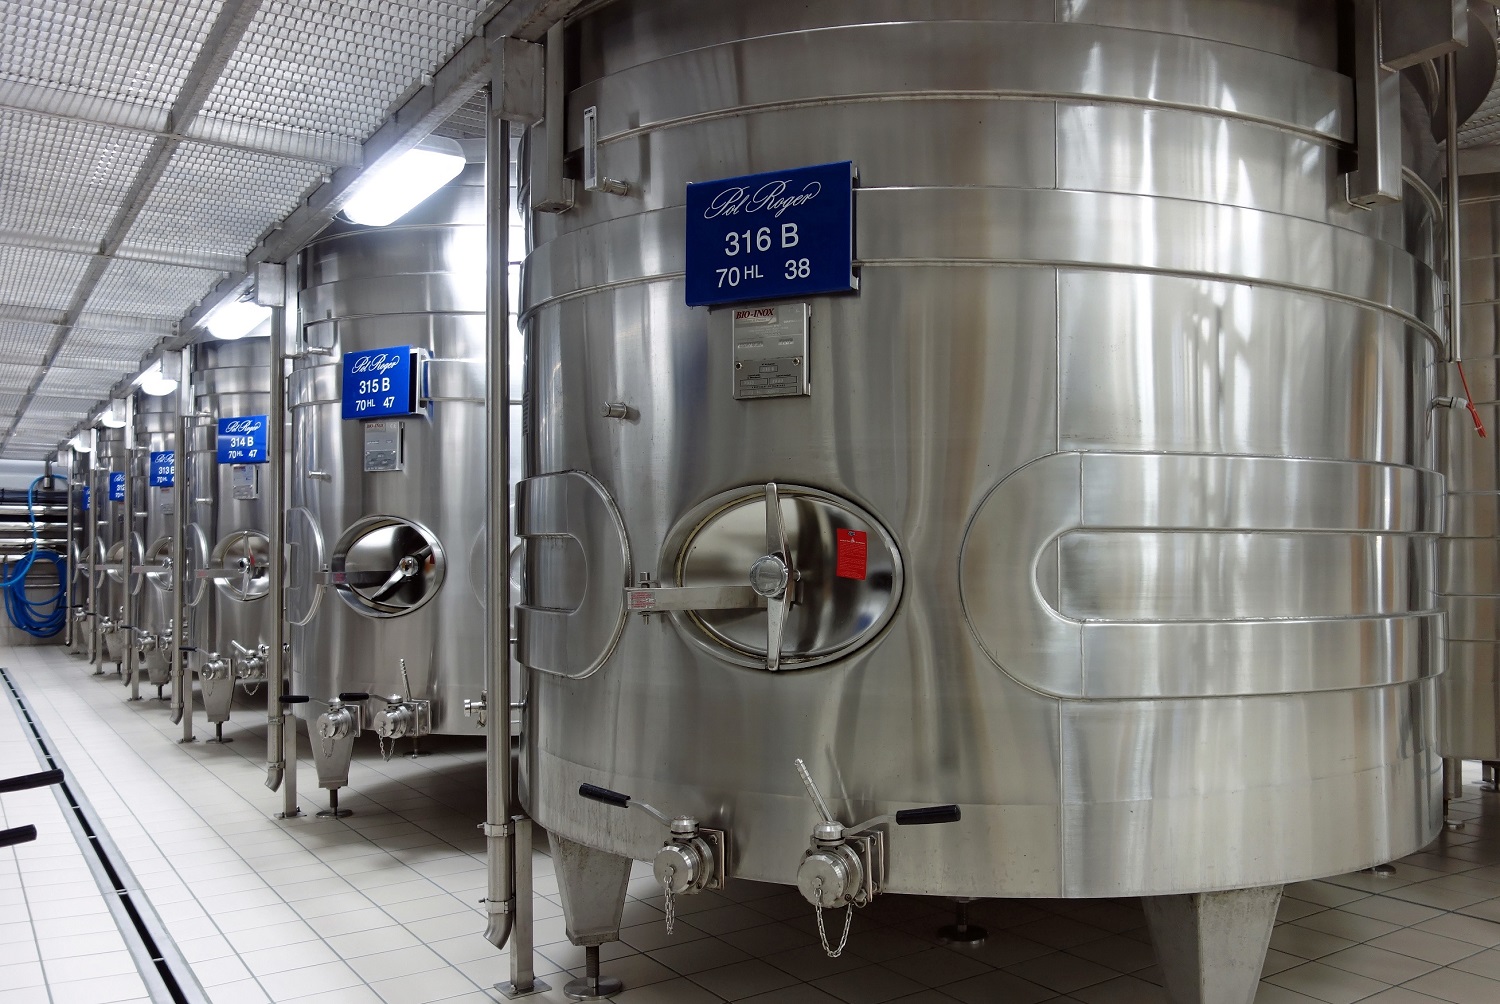 Stainless steel tanks are key for preserving freshness in Champagne